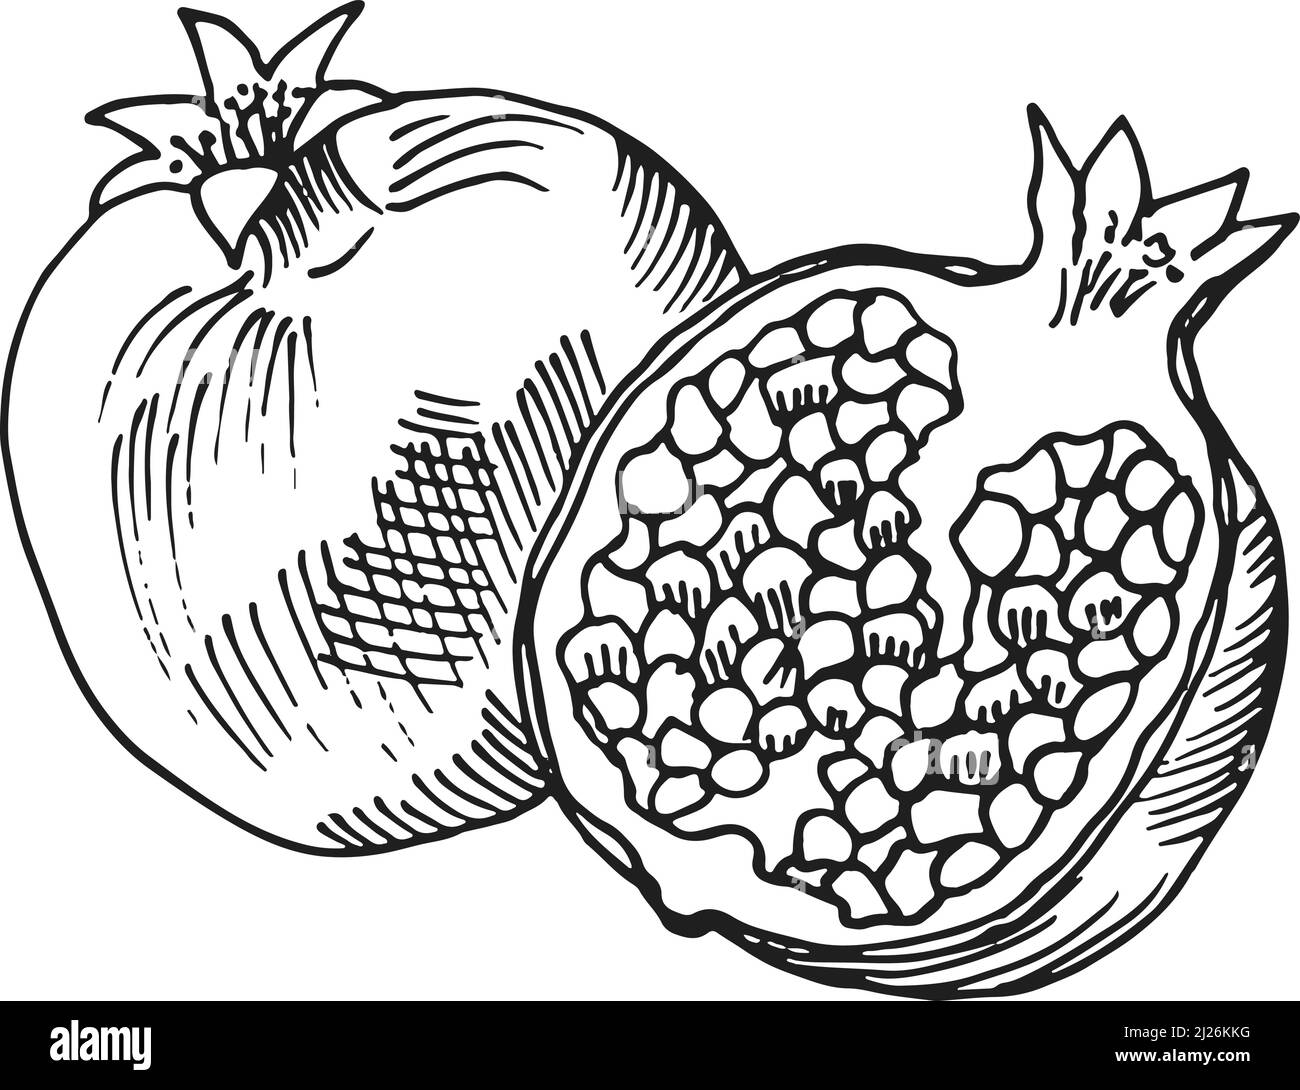 Black and White Cartoon Illustration of Pomegranate Fruit Food Object for  Coloring Book Stock Photo - Alamy